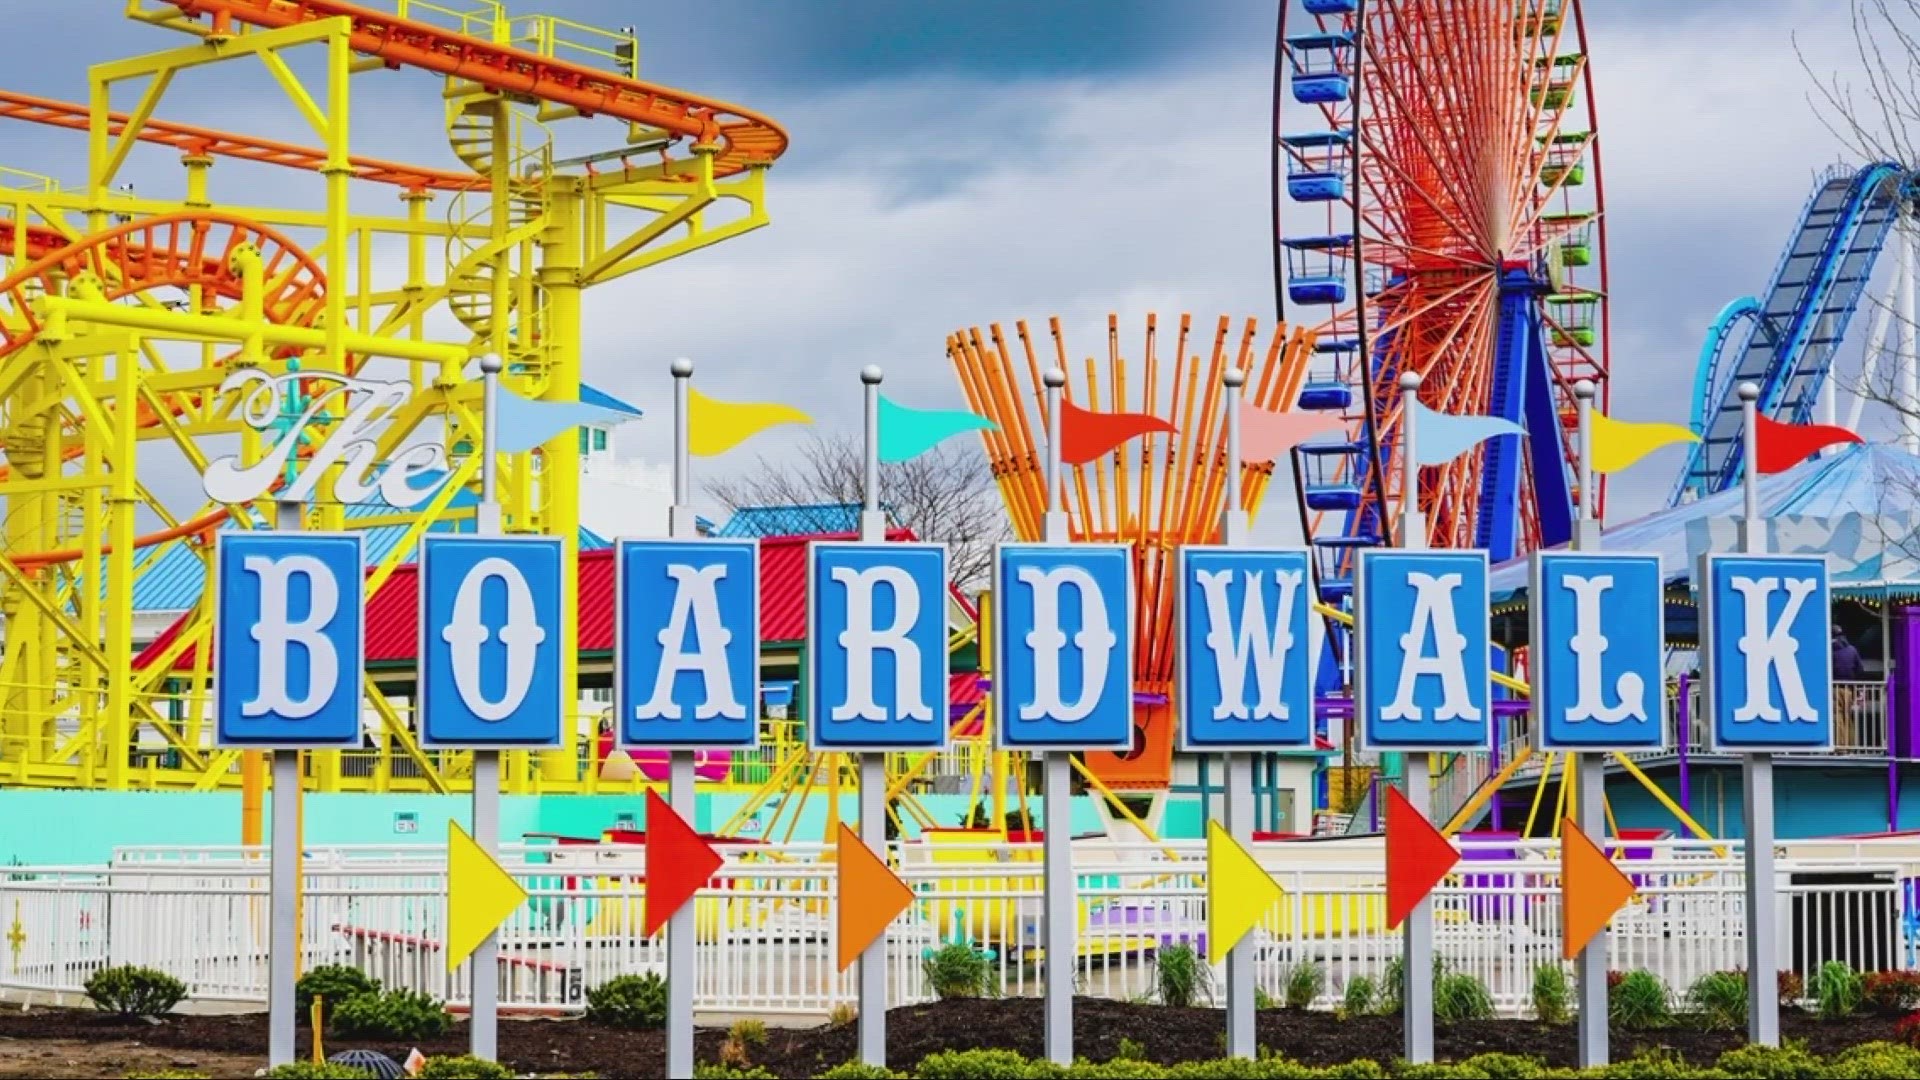 Cedar Point opens for the 2023 season with their new Wild Mouse spinning roller coaster and reimagined Boardwalk experience with Grand Pavilion.